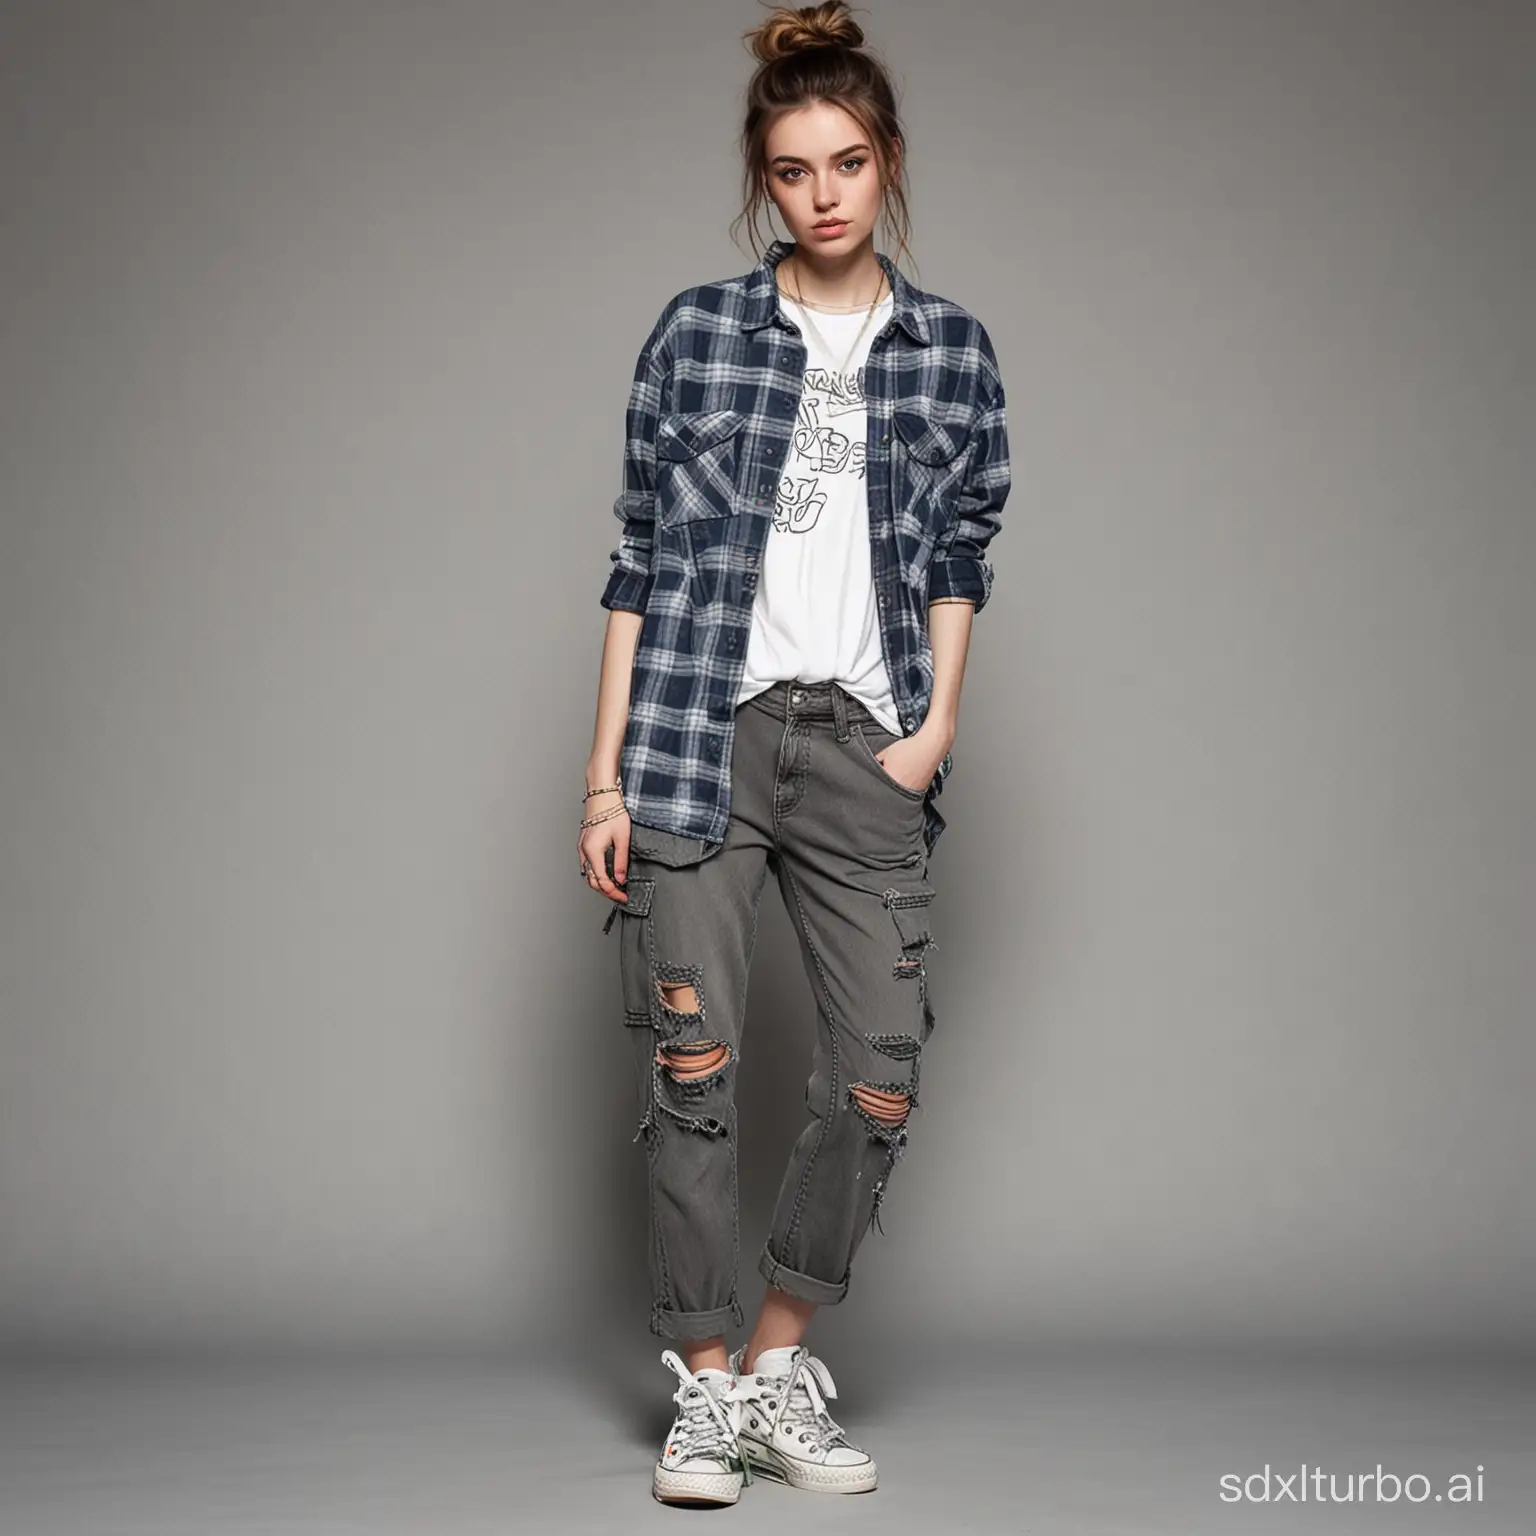 Portrait of a girl, styled by Pajaritito490. Line and ink color painting, 1girl, solo, grunge clothing, pressed jeans, oversized torn flannel shirt layered over a graphic ribboned t-shirt, cargo pants, worn-out sneakers paired with neon accented accessories, gray eyes, pale skin, looking towards the viewer,